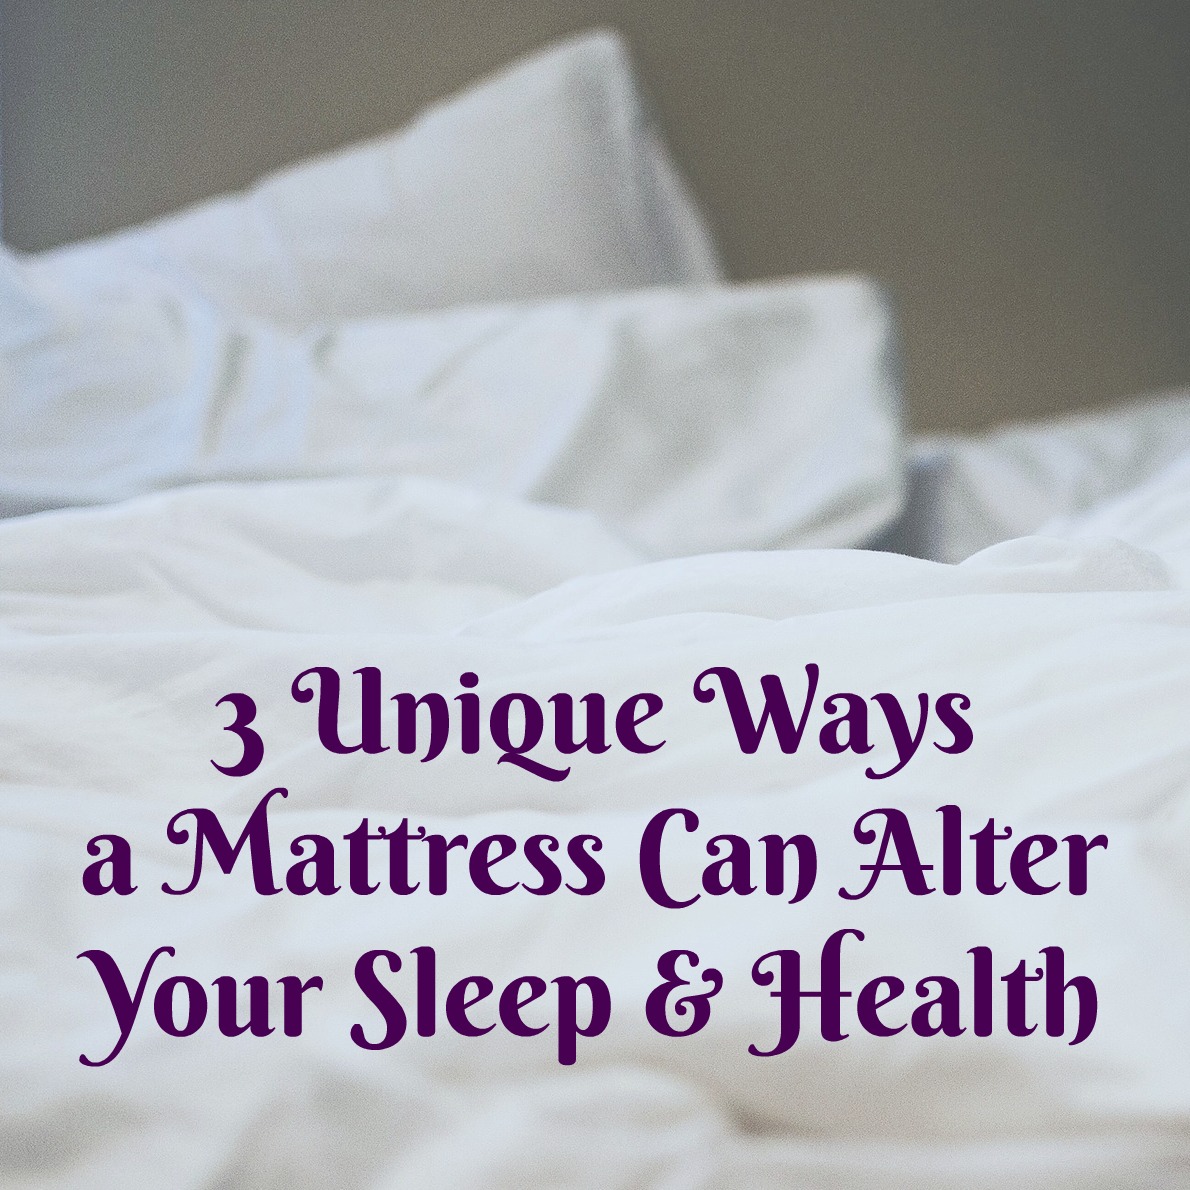 3 Unique Ways a Mattress Can Alter Your Sleep and Health